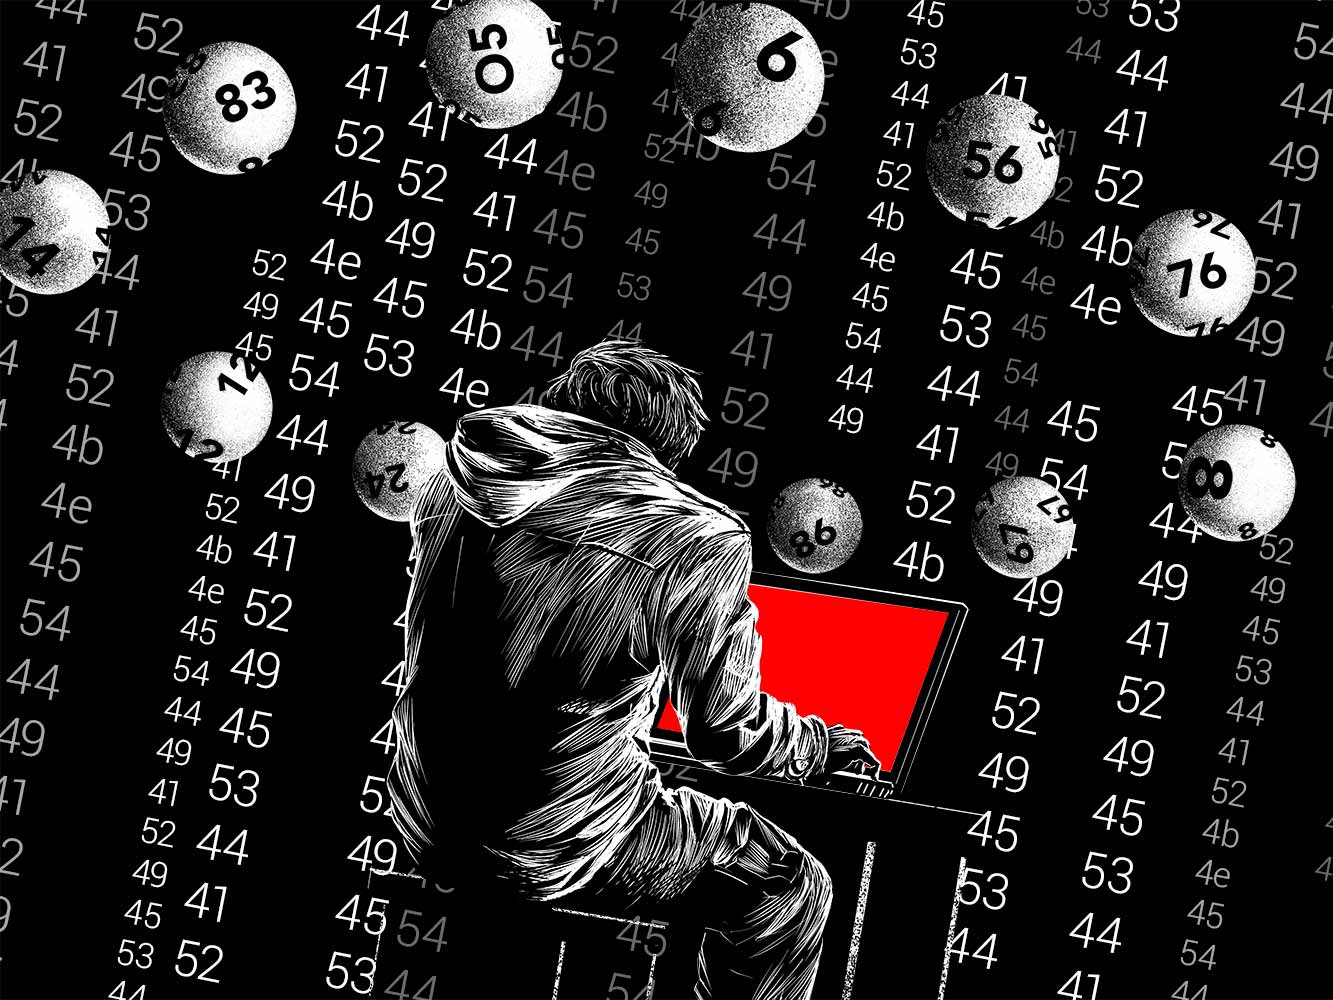 Lottery balls flying around a person on a computer.